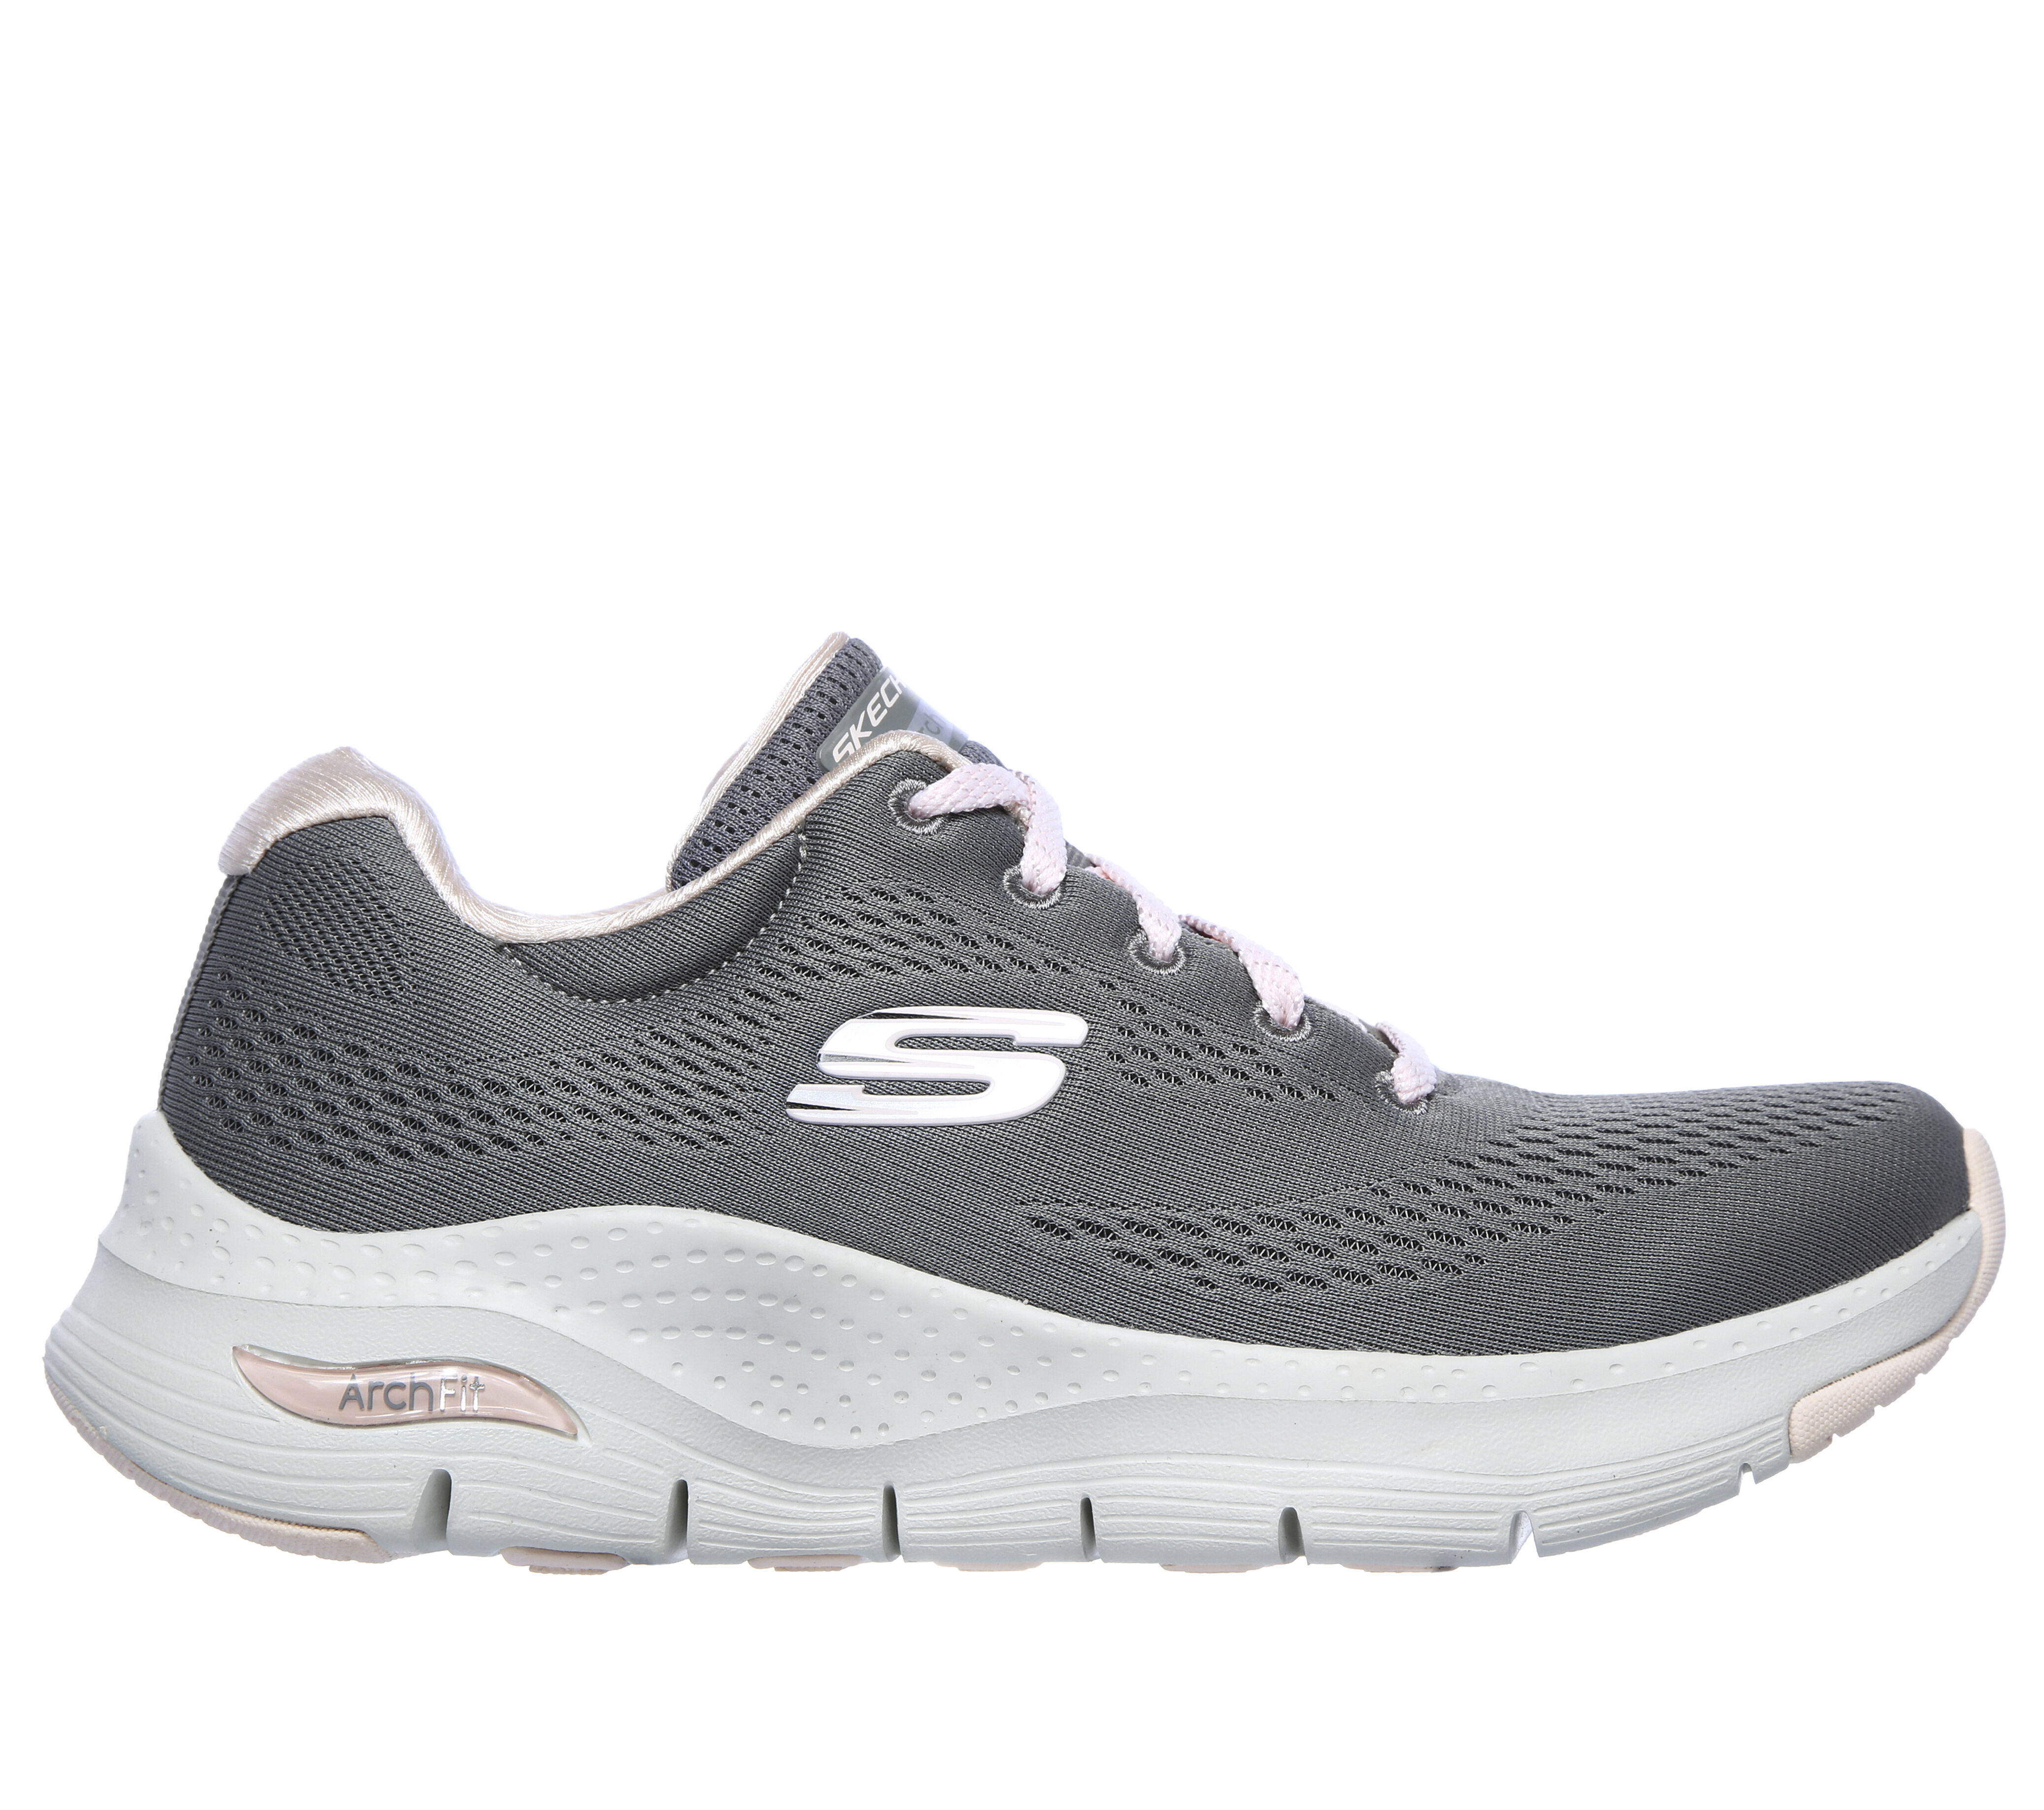 skechers raise your glass wedge trainers